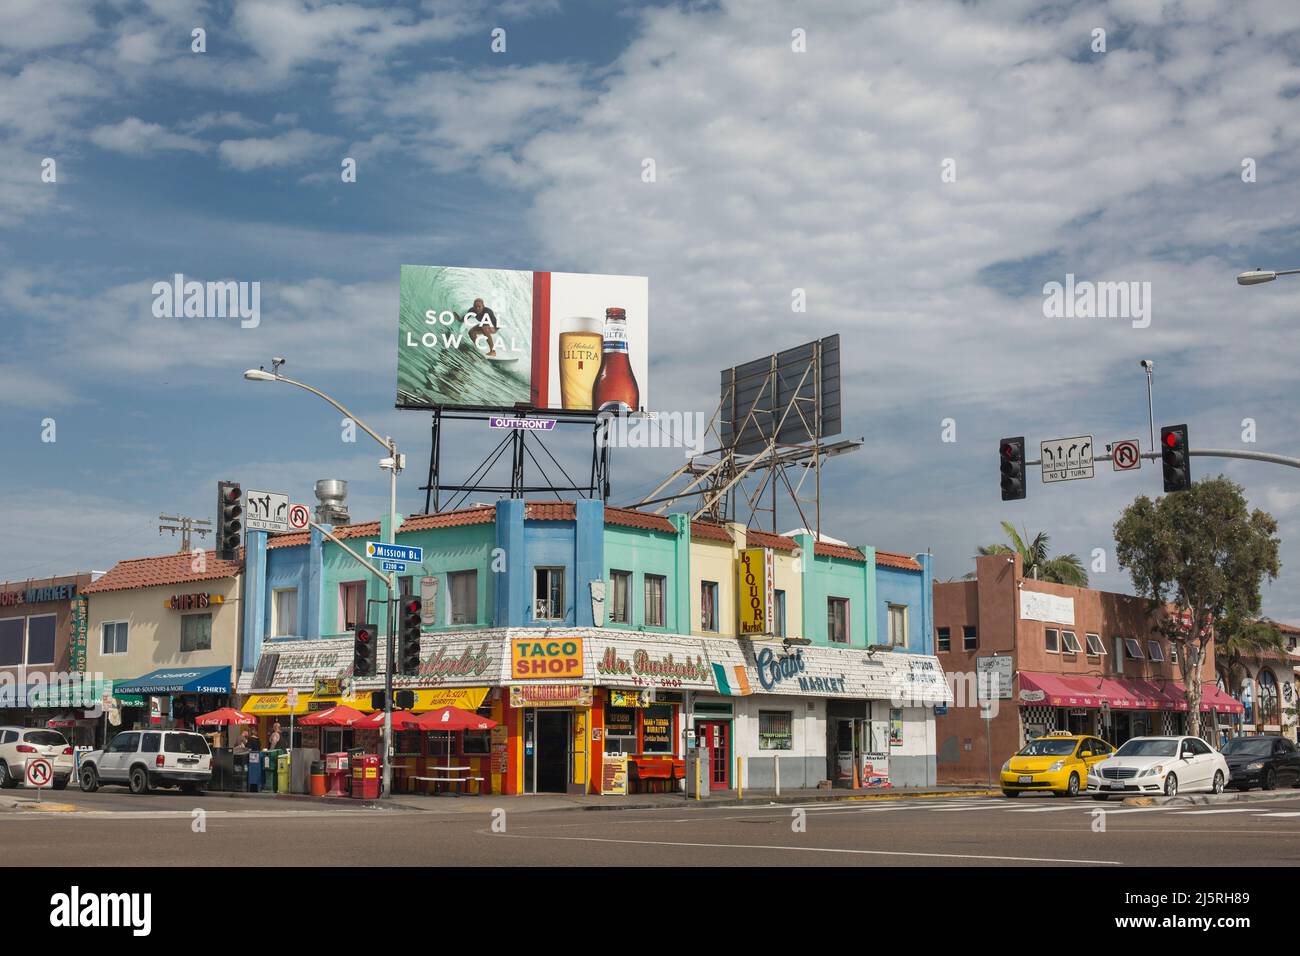 Pastel- colored shops, Mexican restaurants and billboards in Mission Bay, San Diego Stock Photo